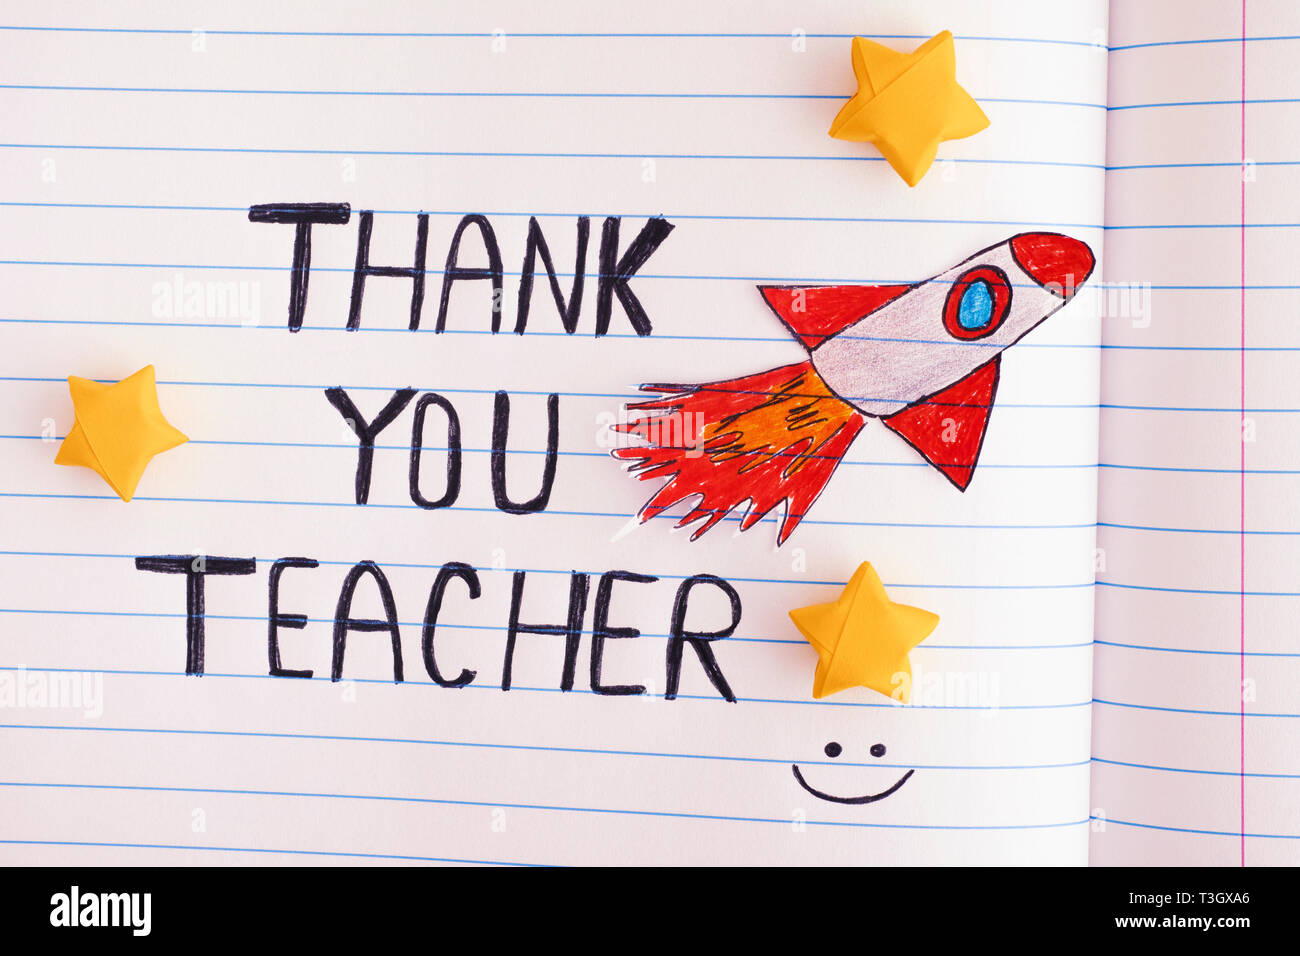 Thank You Teacher. Lined paper notepad with words Thank You Teacher and with Space Rocket Blasting Off  Through Yellow Origami Stars. Close up. Stock Photo